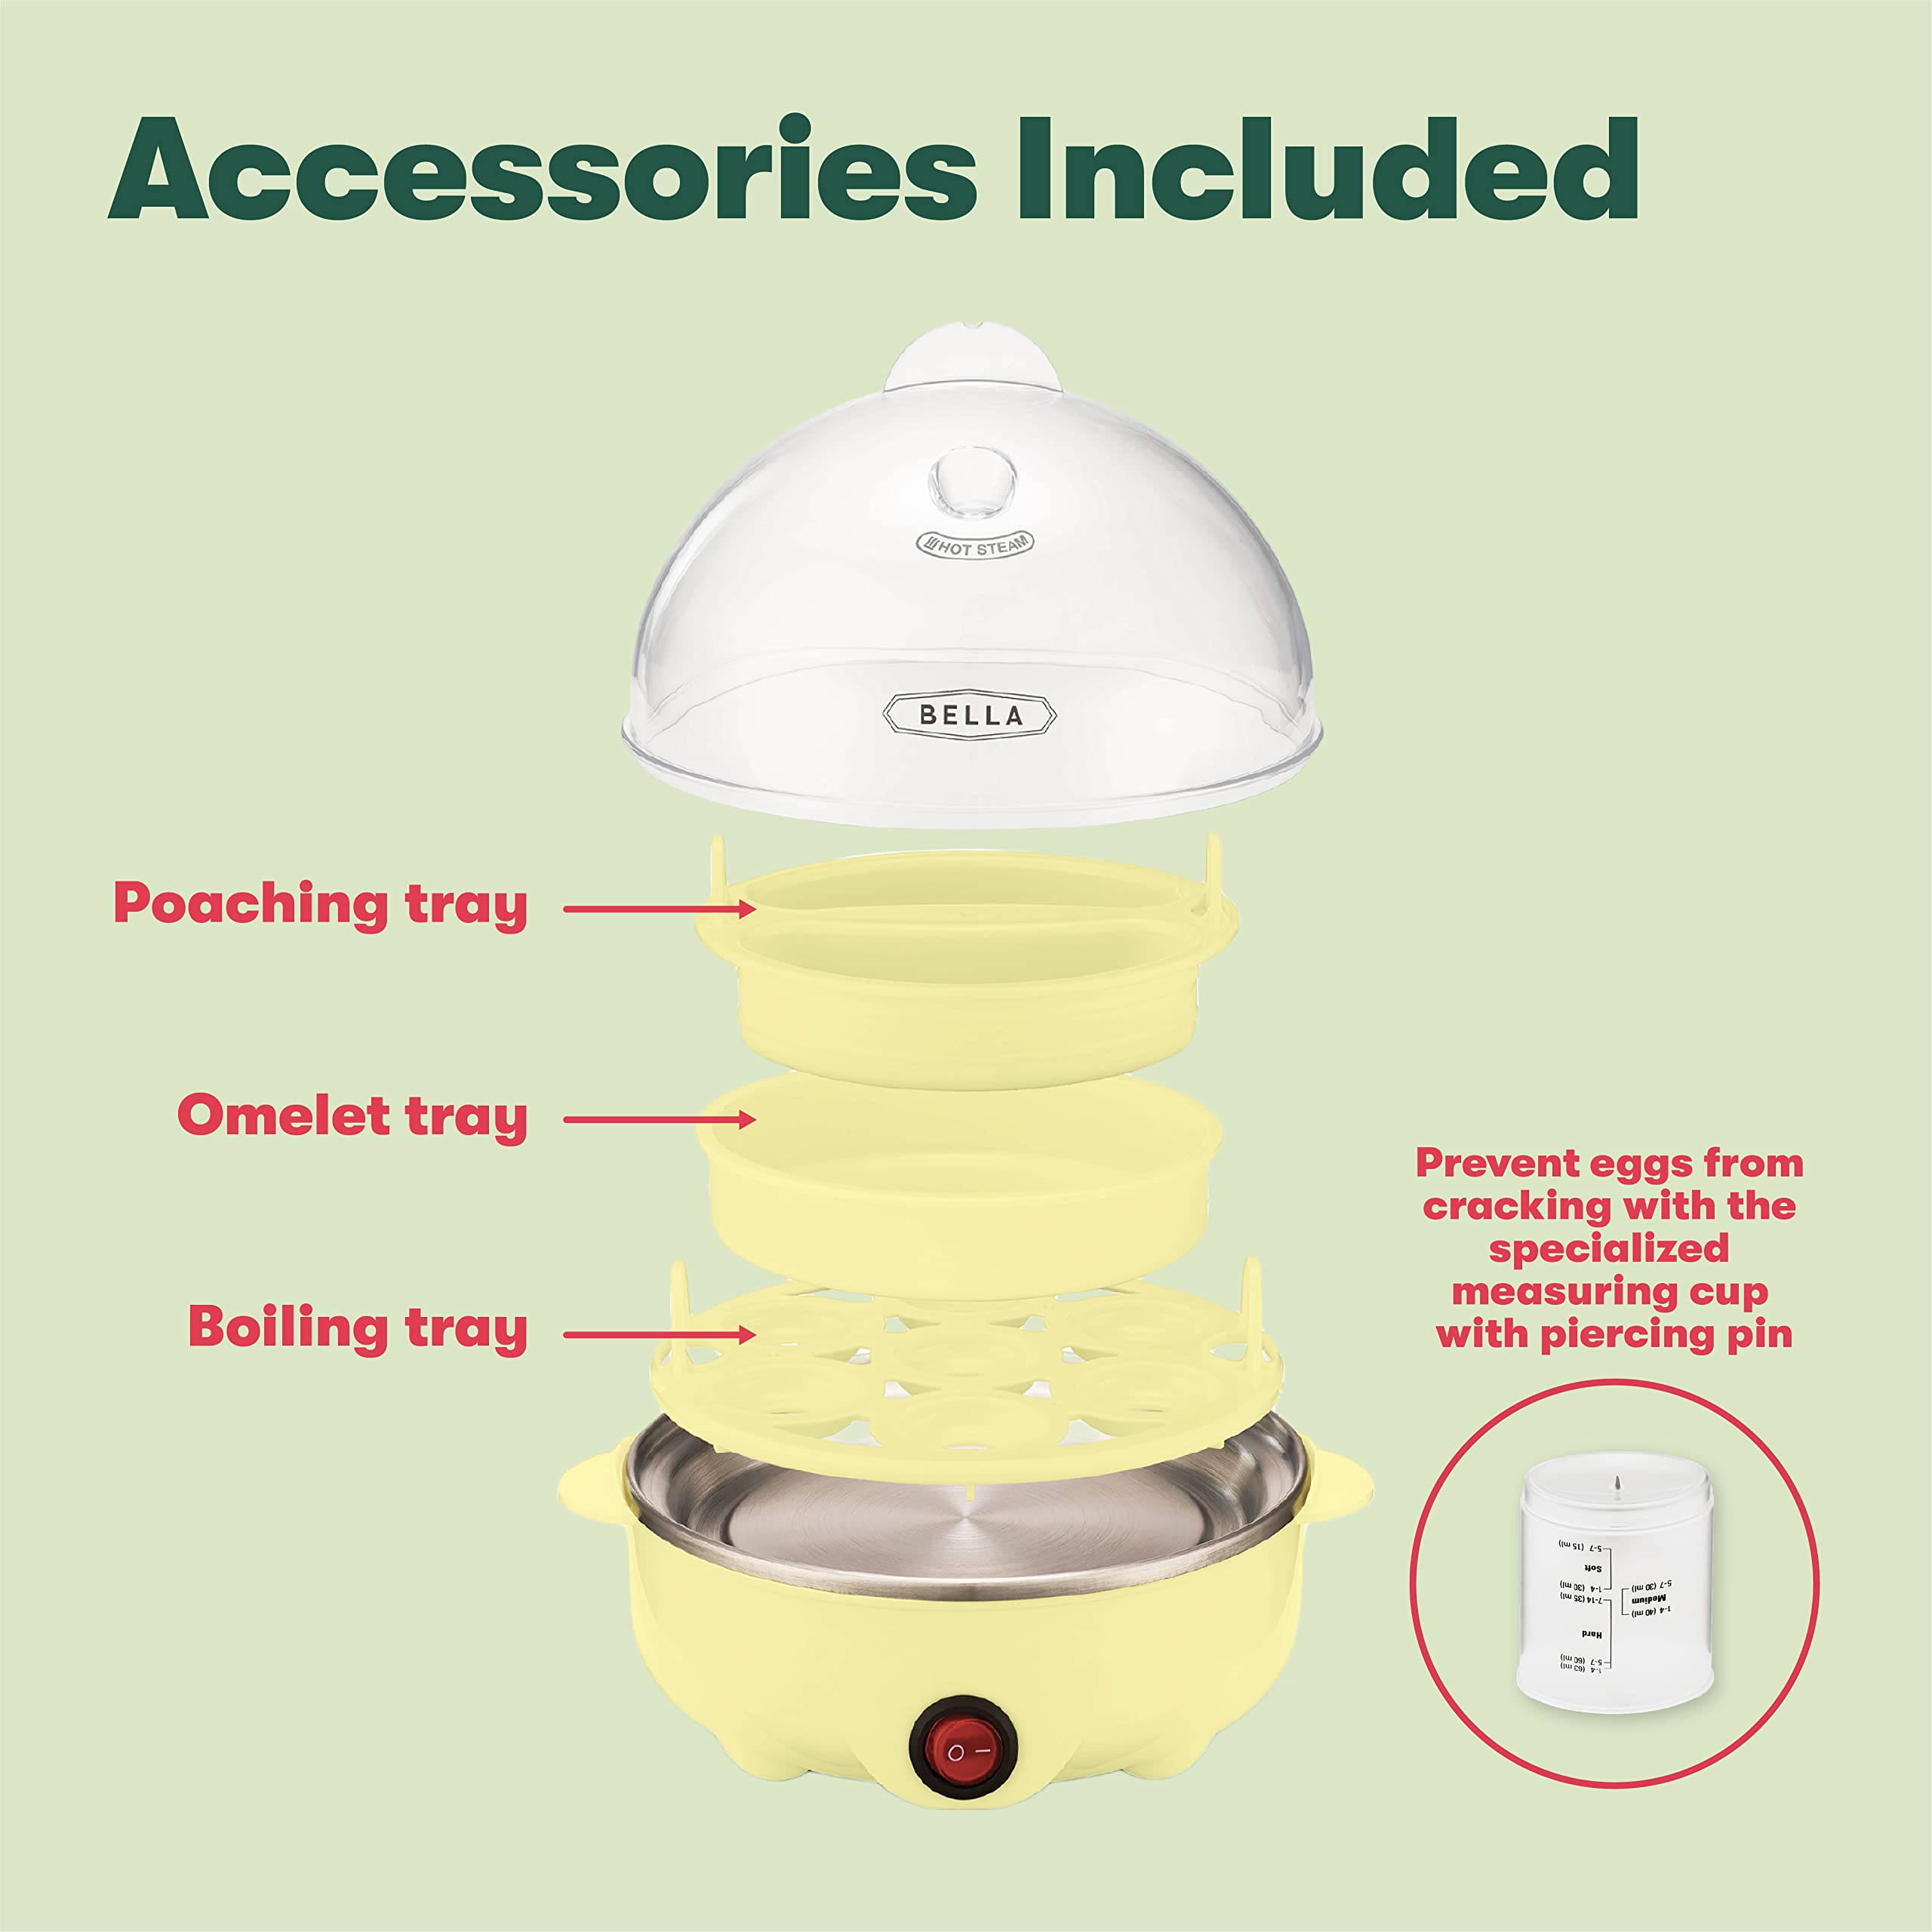 BELLA Rapid Electric Egg Cooker and Poacher with Auto Shut Off for Omelet, Soft, Medium and Hard Boiled Eggs - 7 Egg Capacity Tray, Single Stack, Yellow